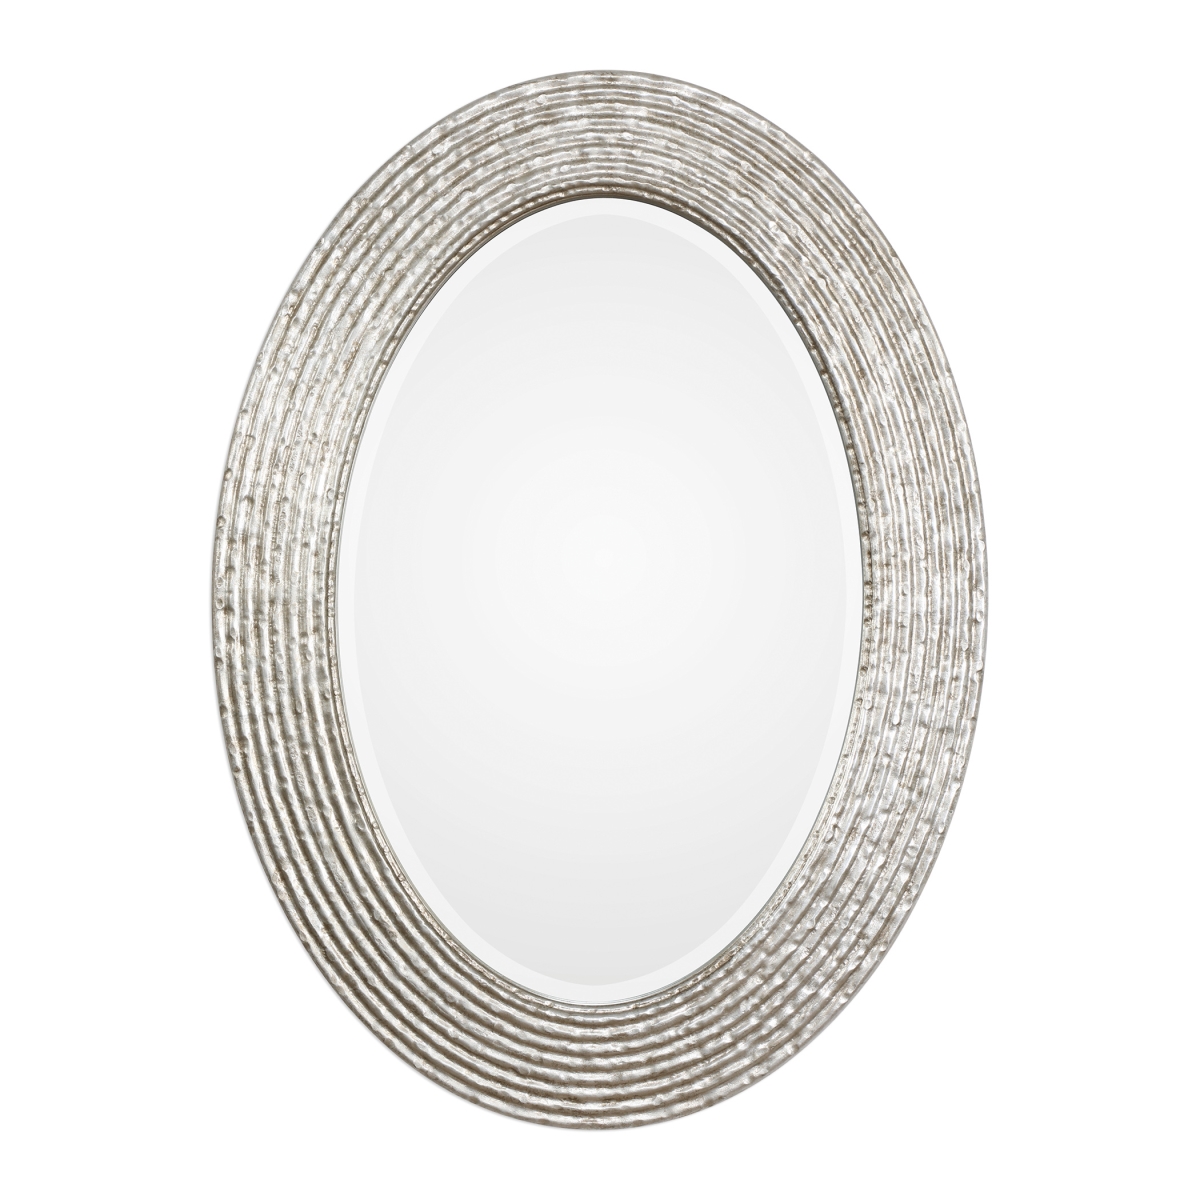 Picture of 212 Main 09356 Conder Oval Silver Mirror